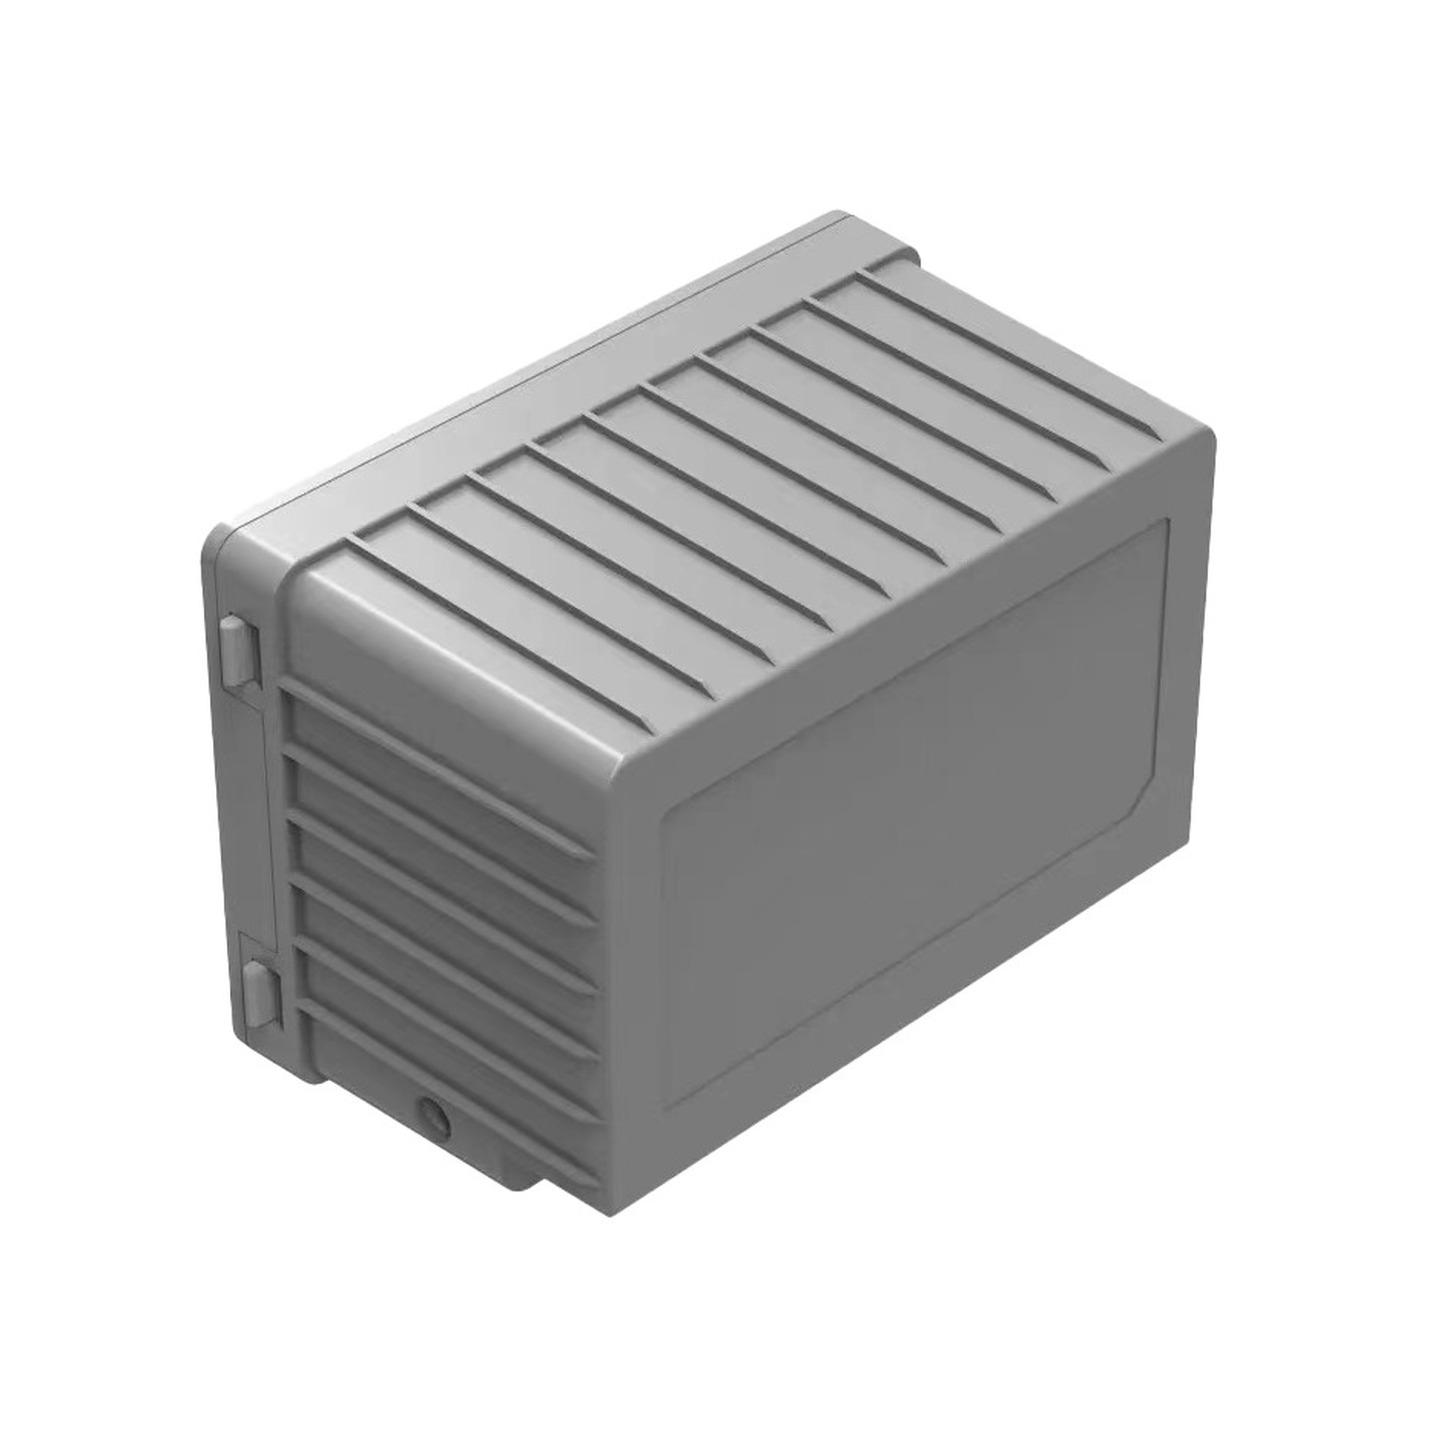 5.2Ah Removable Lithium Battery Version 3 to Suit Brass Monkey Fridge/Freezers with Battery Support